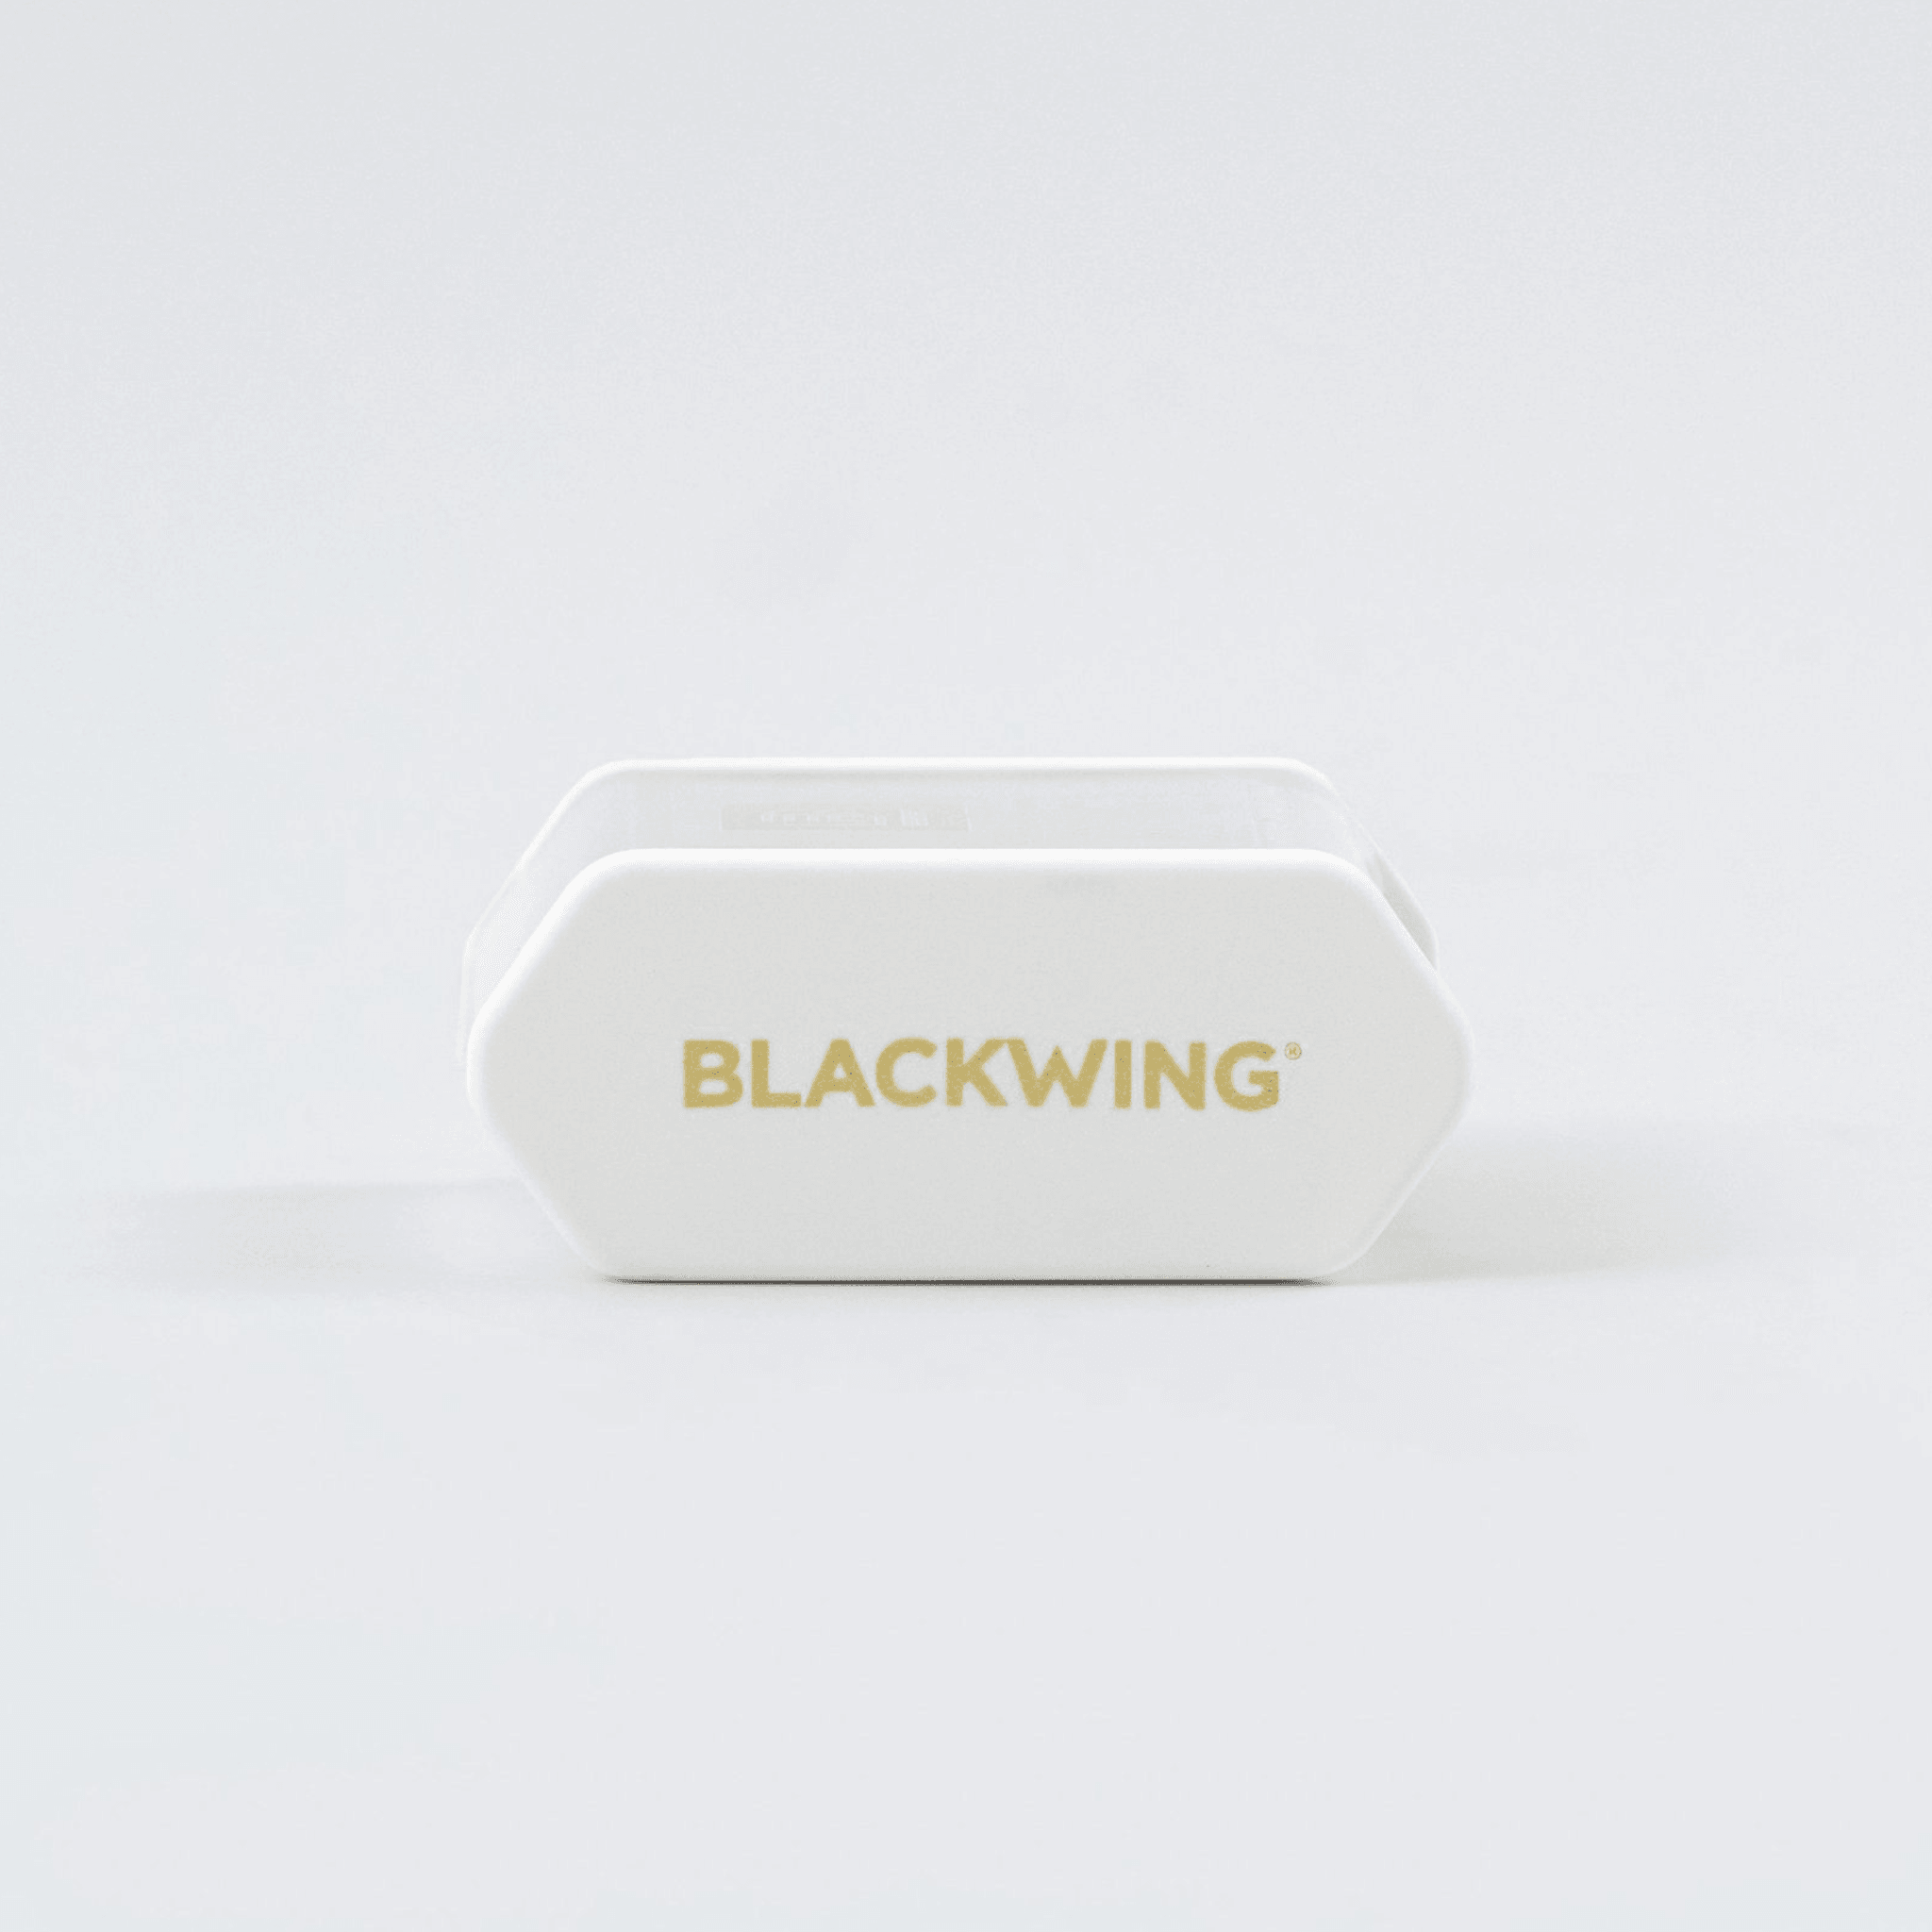 Blackwing Two-Step Long Point Sharpener White - Laywine's